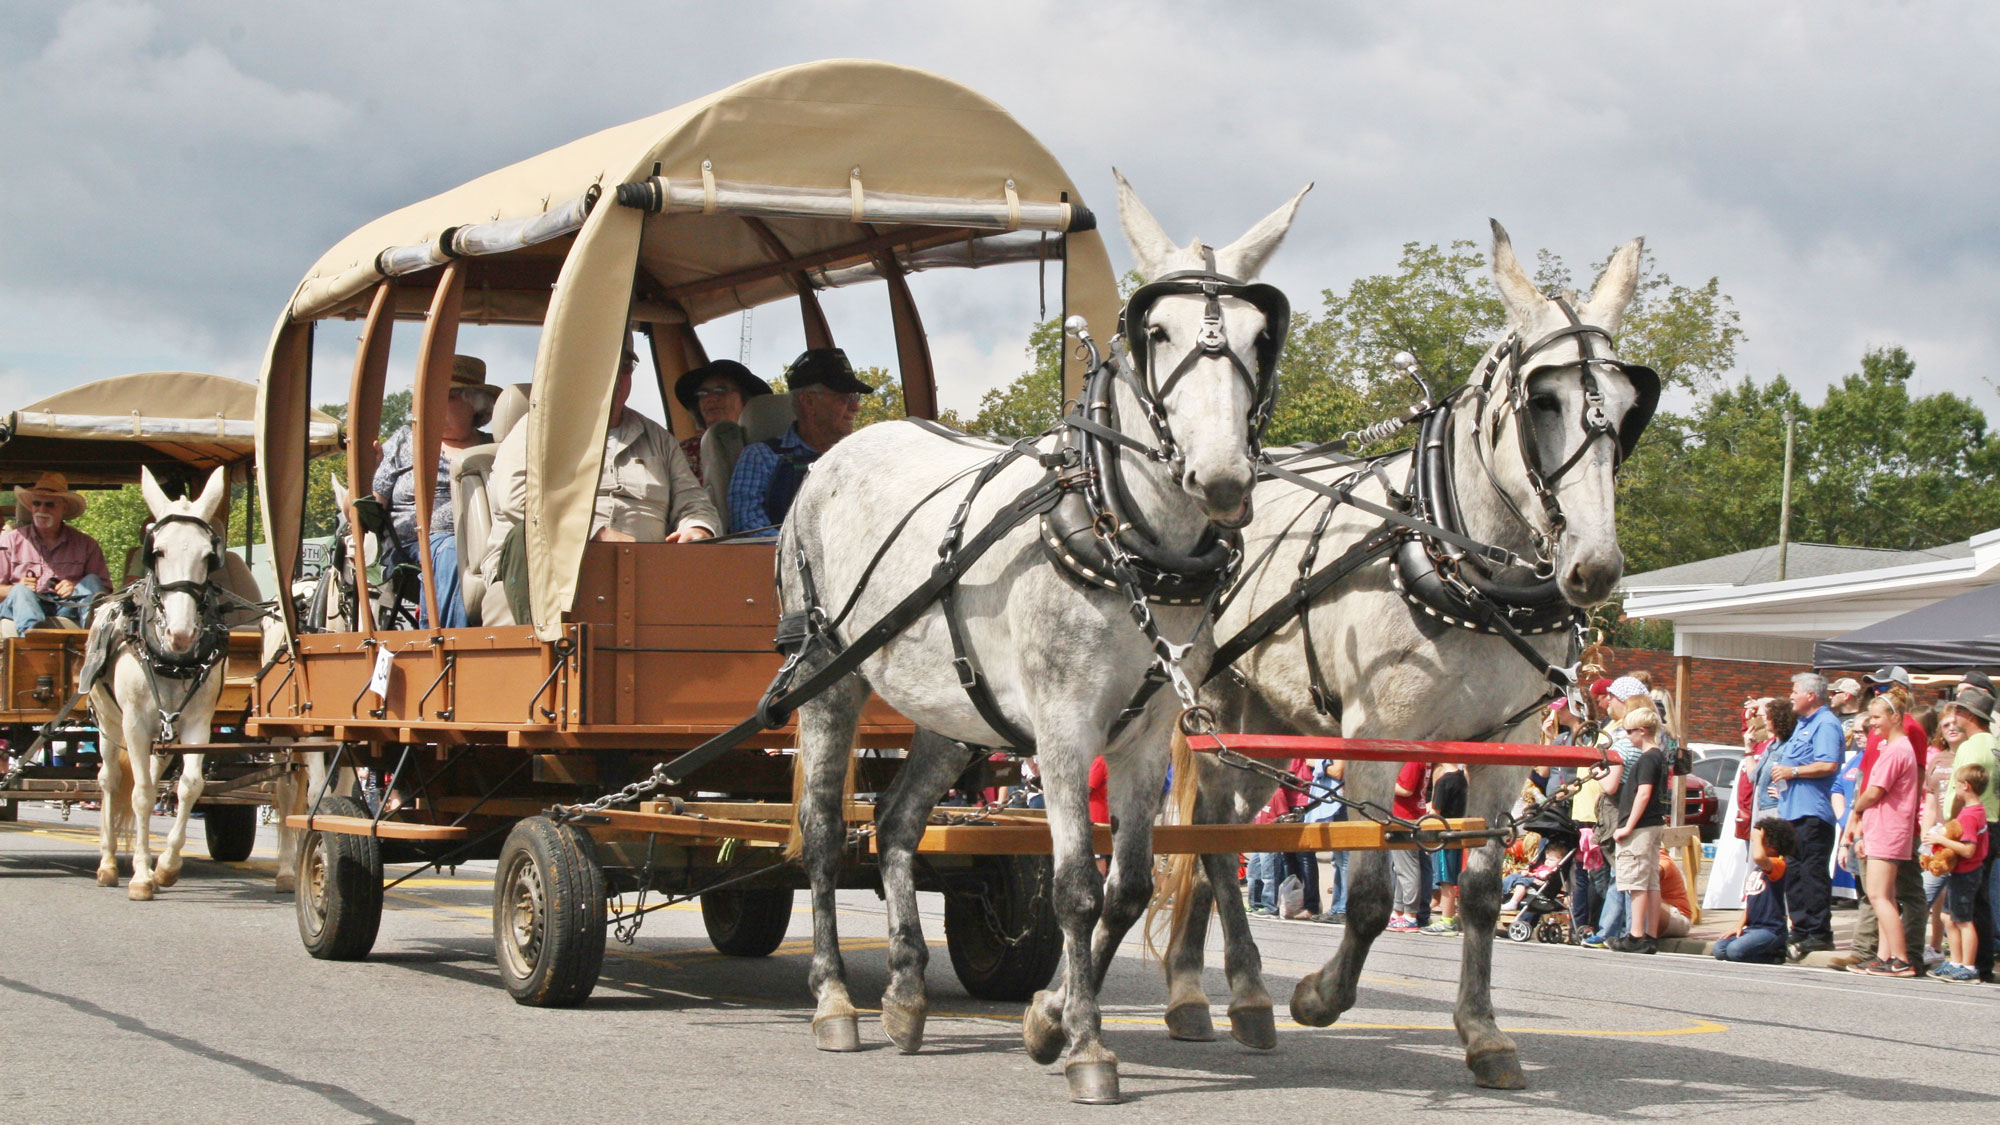 Mule Day in Winfield, Alabama. Two white mules pulling a covered wagon filled with people during a street festival.